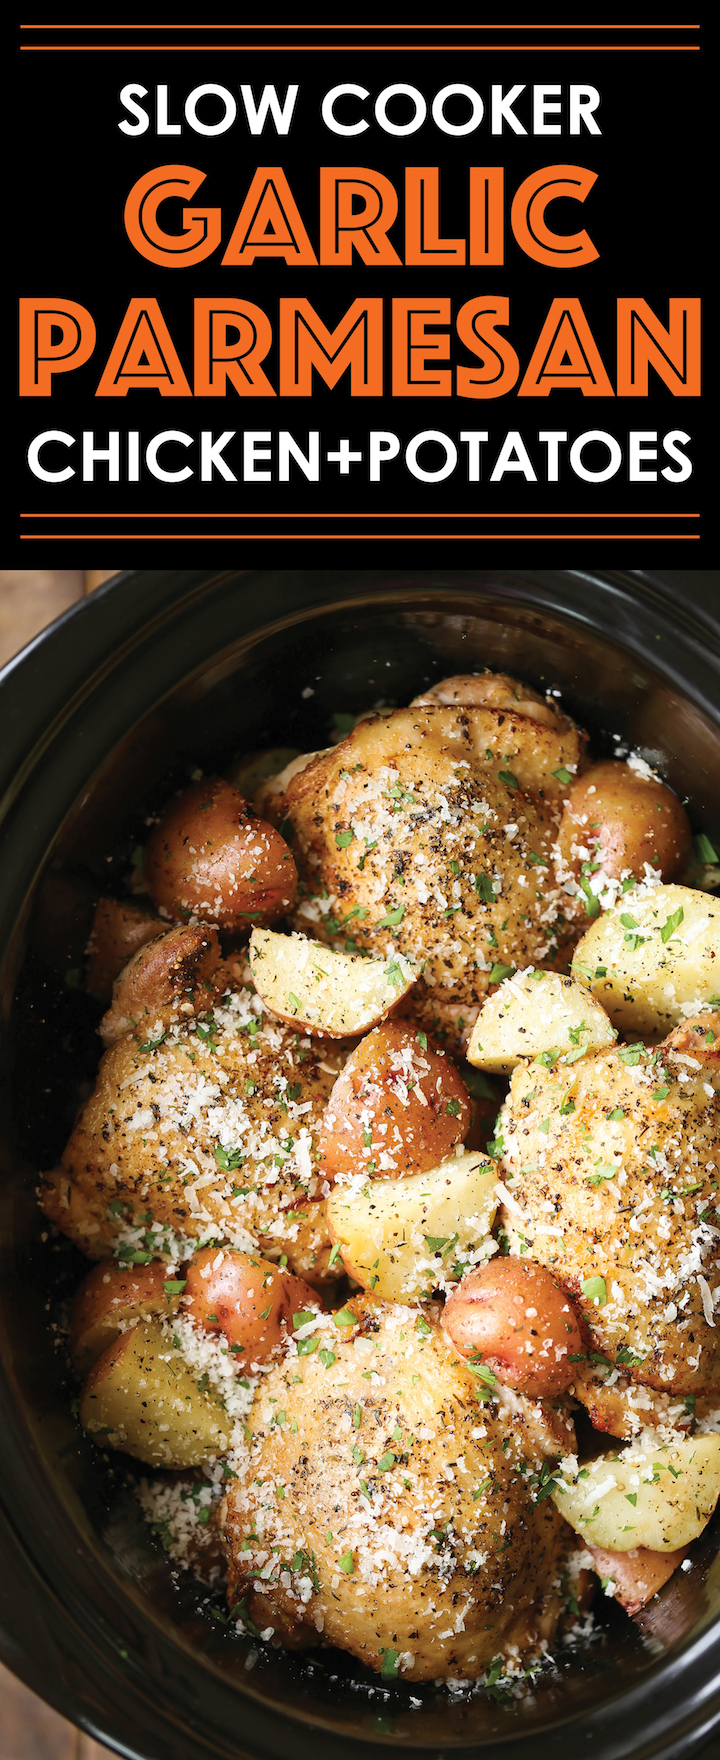 Slow Cooker Garlic Parmesan Chicken And Potatoes Damn Delicious,Whats An Infants Temperature Supposed To Be